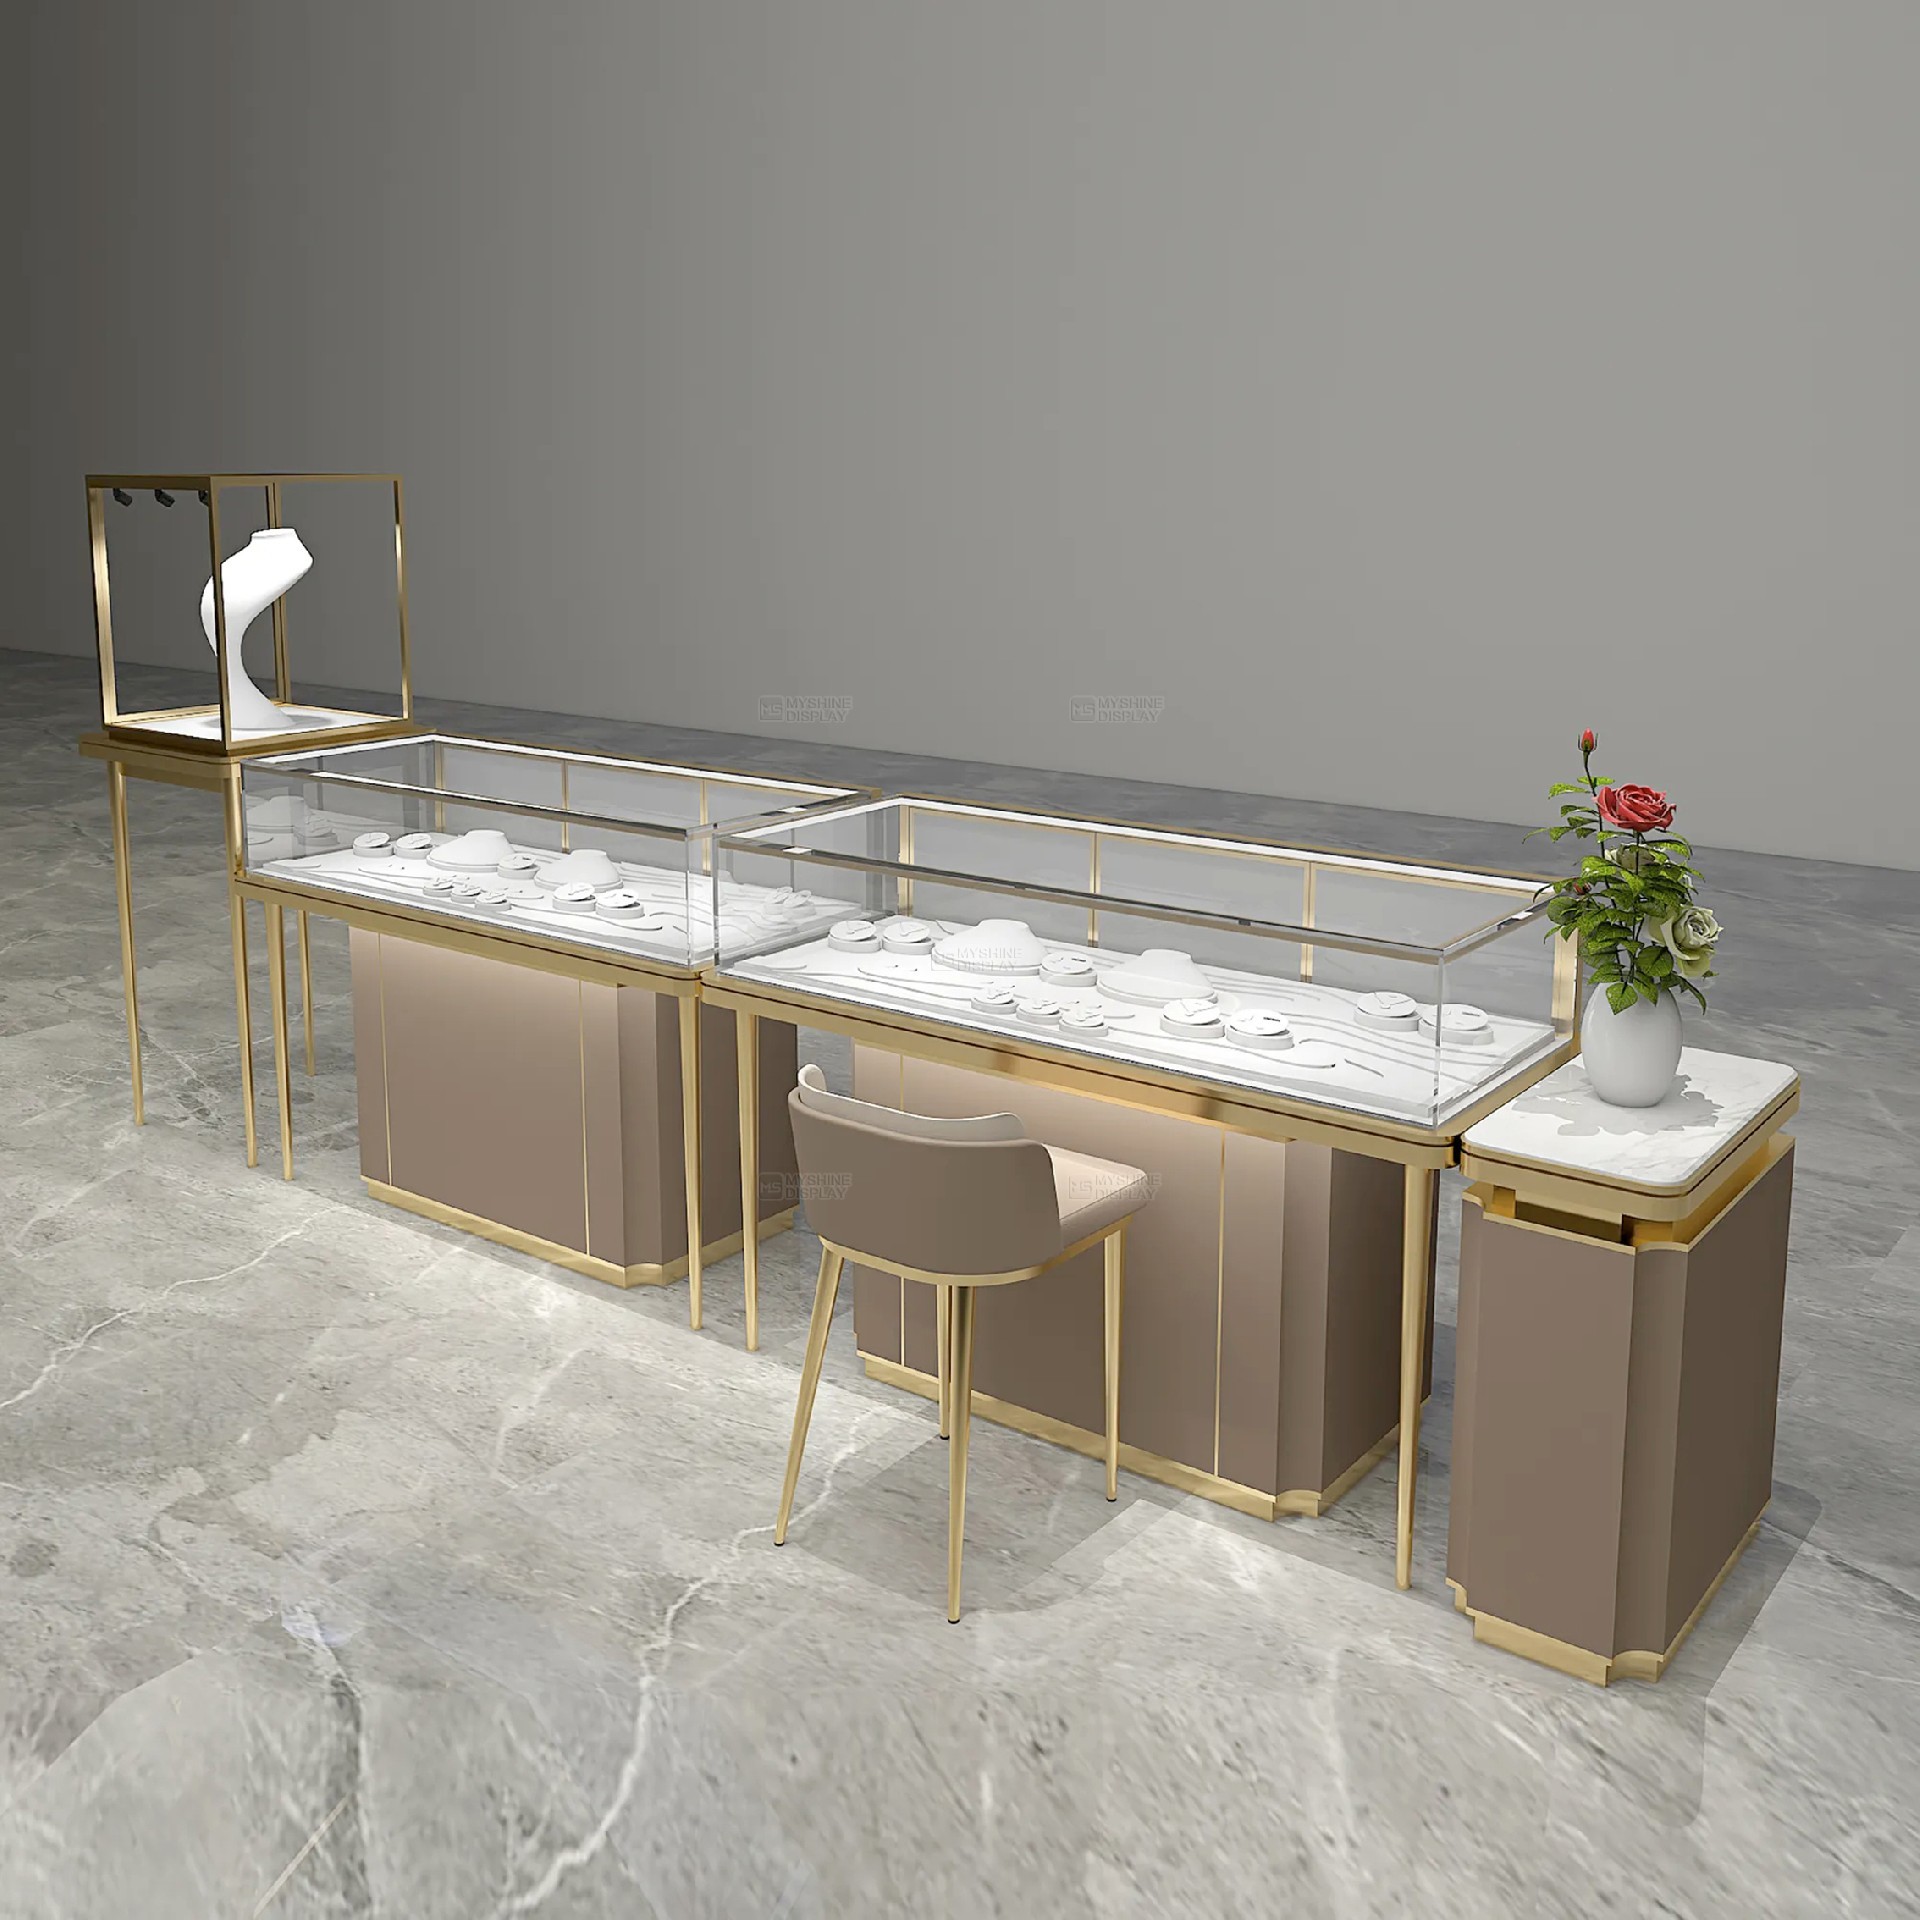 MYSHINE DISPLAY Sophisticated Metal-Glass Jewelry Showcase with Consultation Space 119